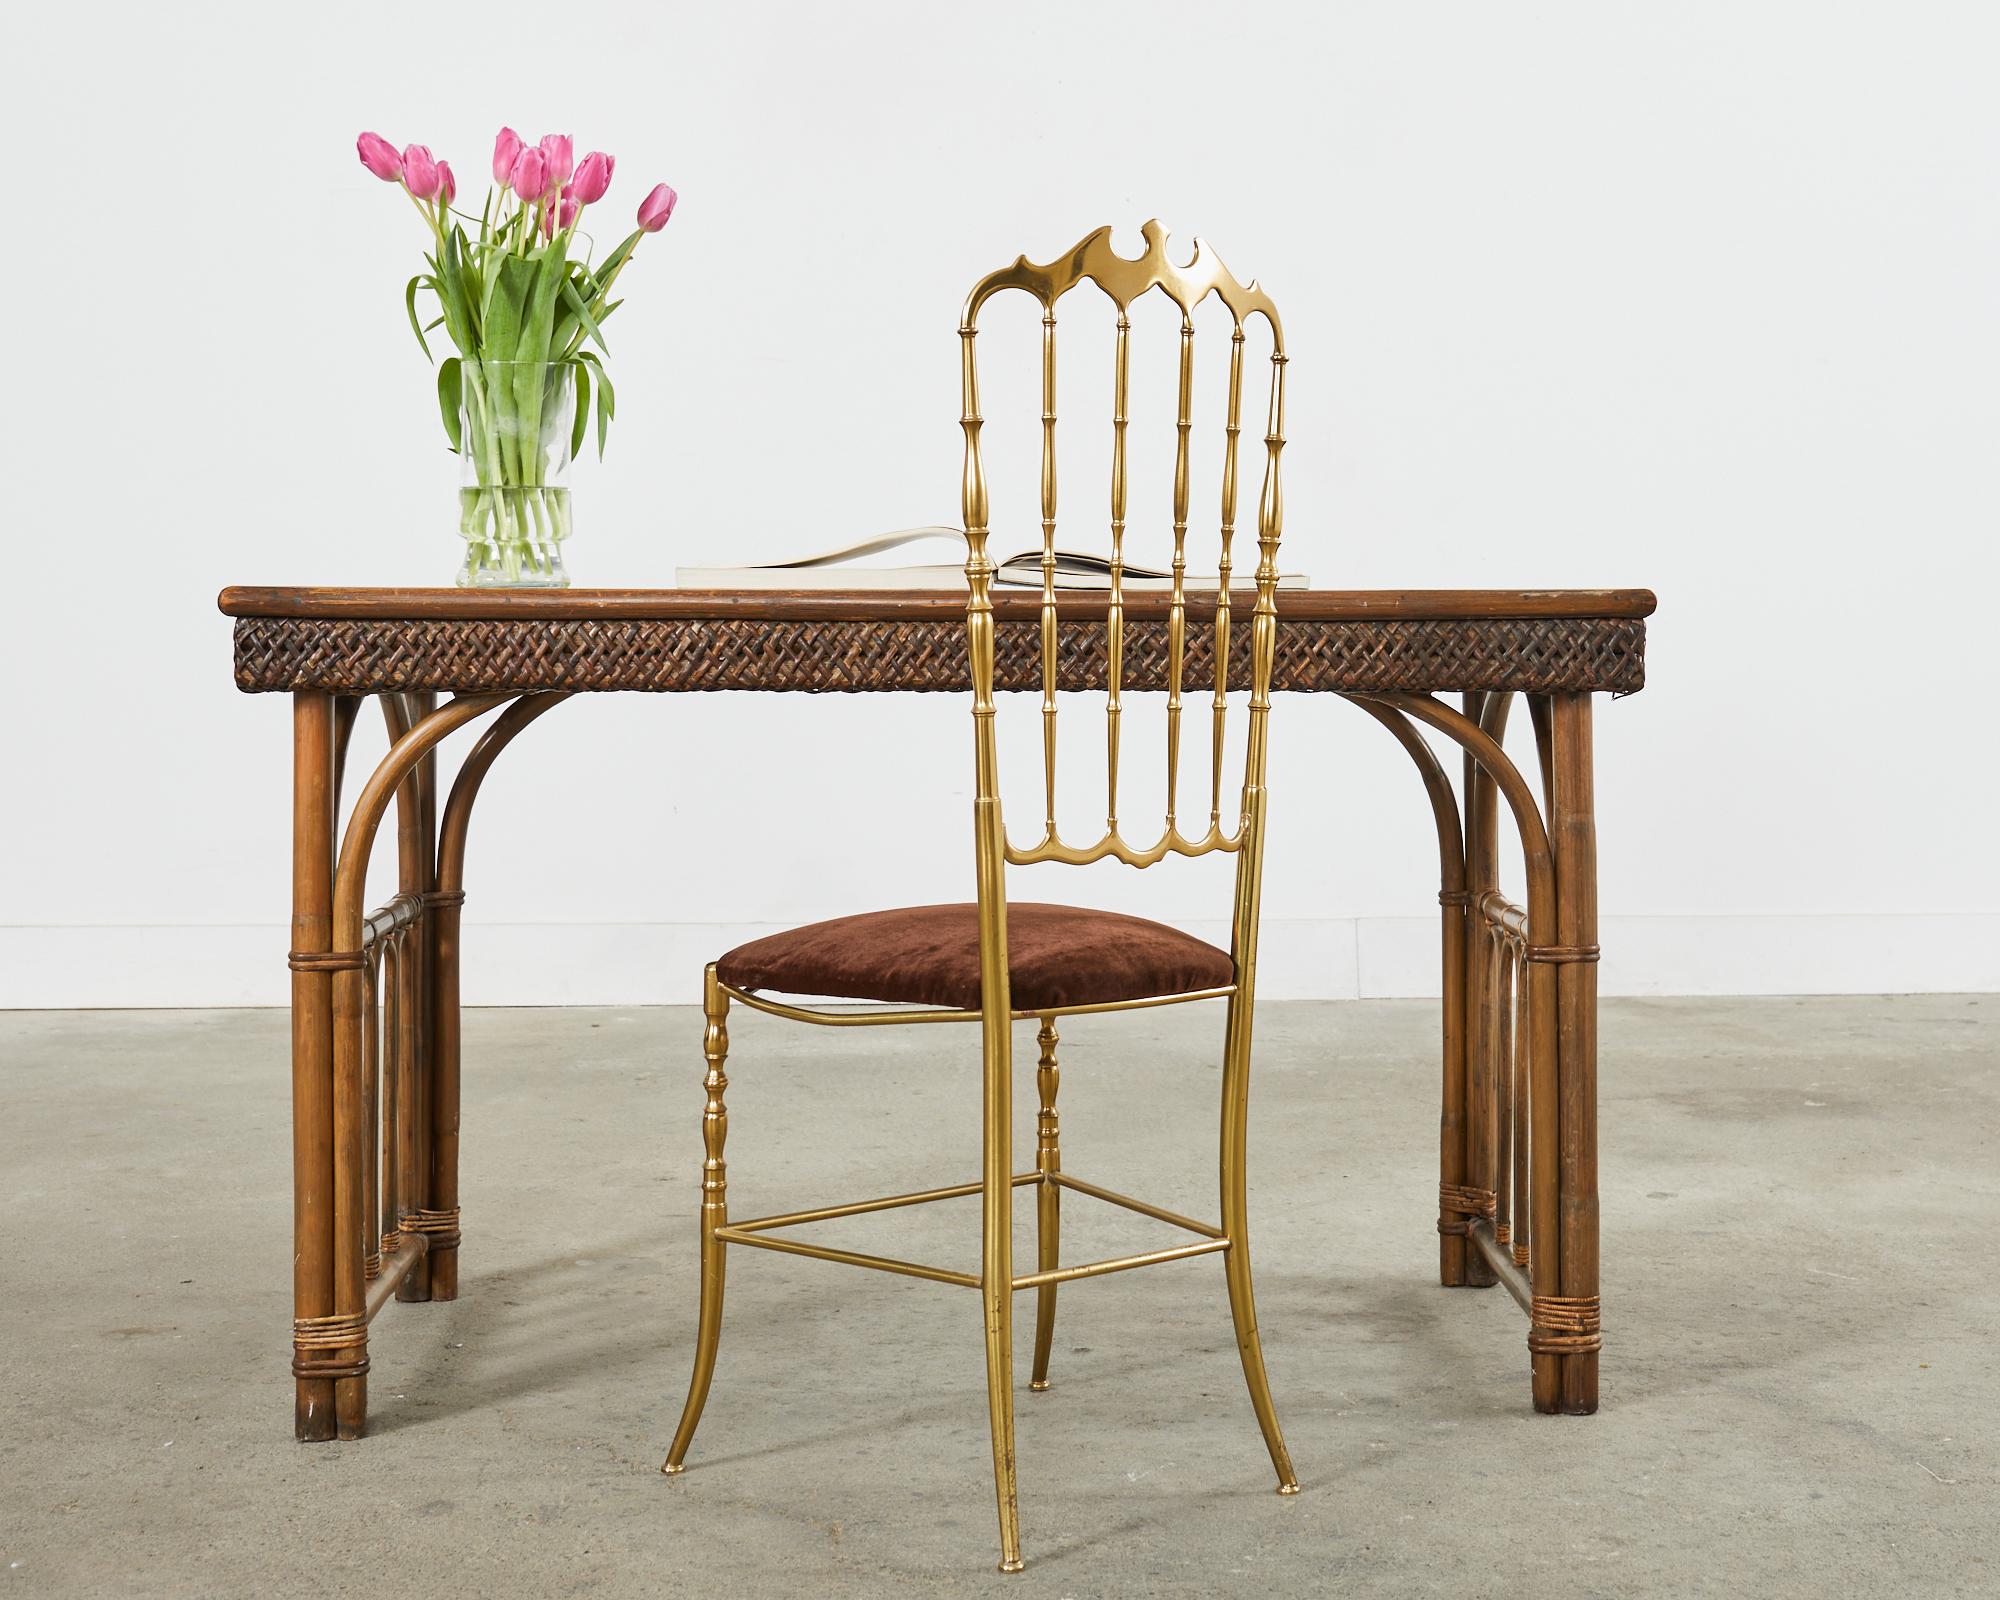 Gorgeous rattan and wicker library table or writing desk made in the English aesthetic movement style featuring a faux-slate top. The table is crafted from pole rattan with gracefully curved supports and decorative arches. The top has a formica